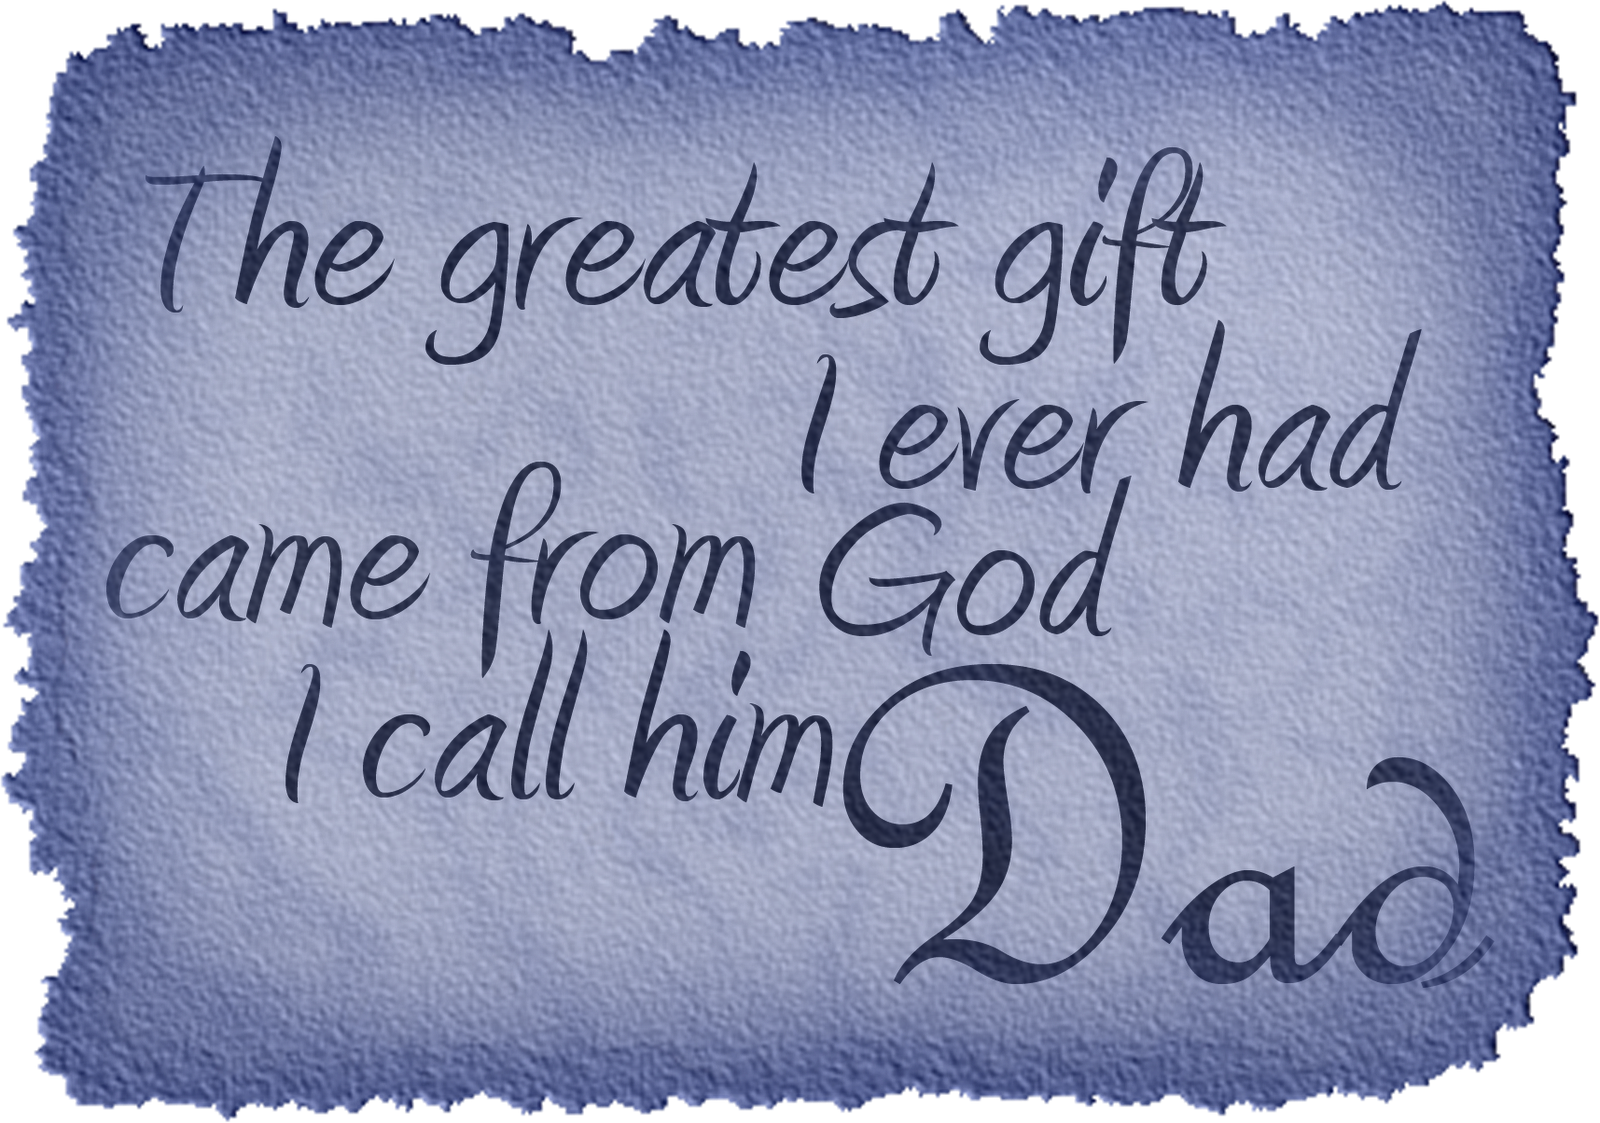 Father's Day HD wallpapers, Desktop wallpaper - most viewed